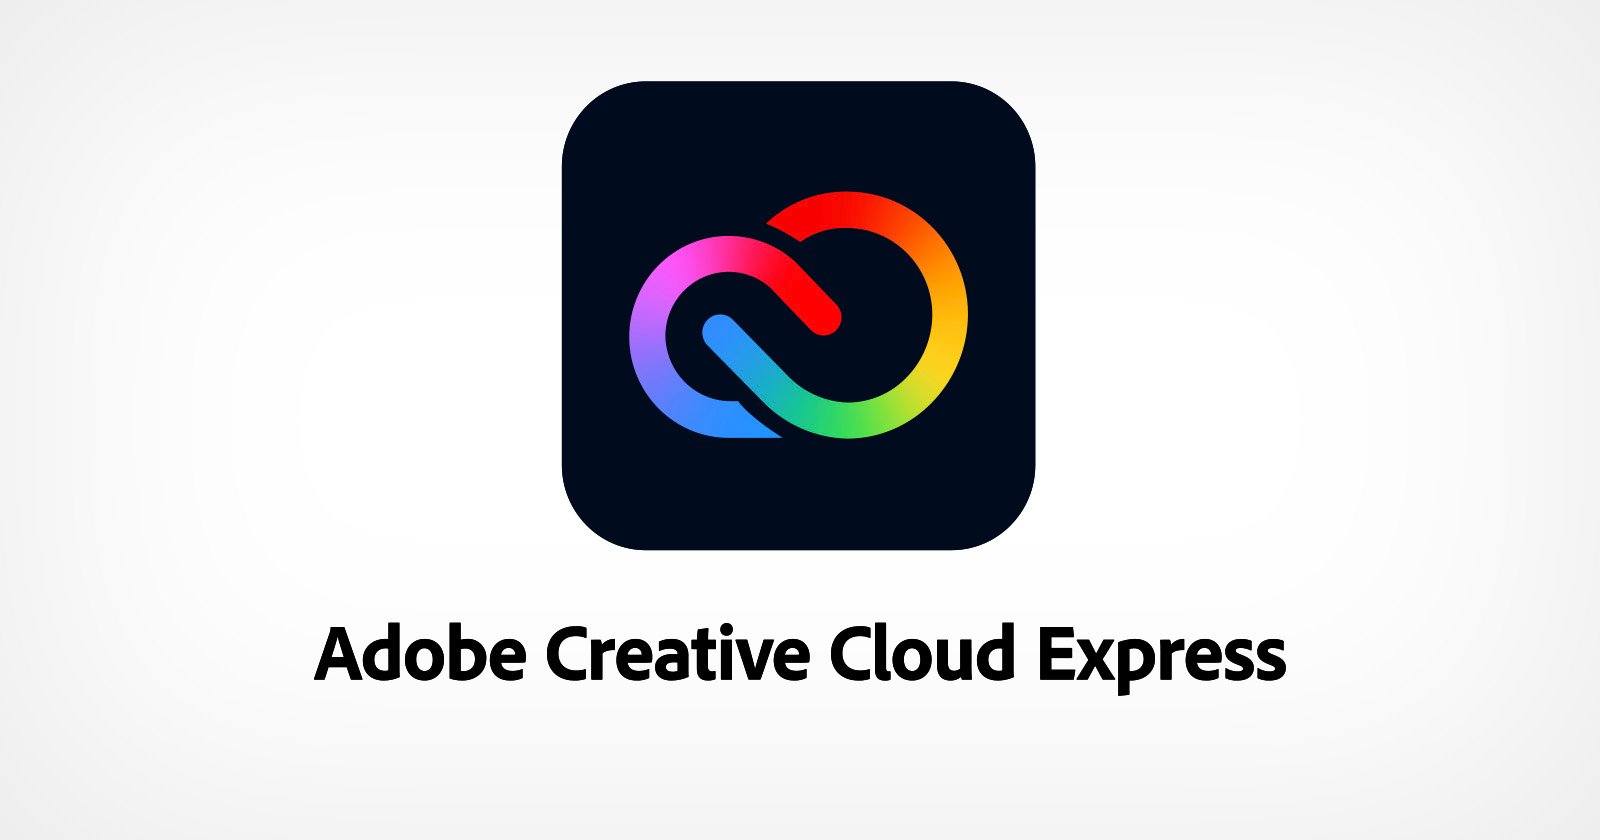 Quickly and easily make standout content from thousands of beautiful templates with the all-new Adobe Creative Cloud Express. Available on web and mobile.